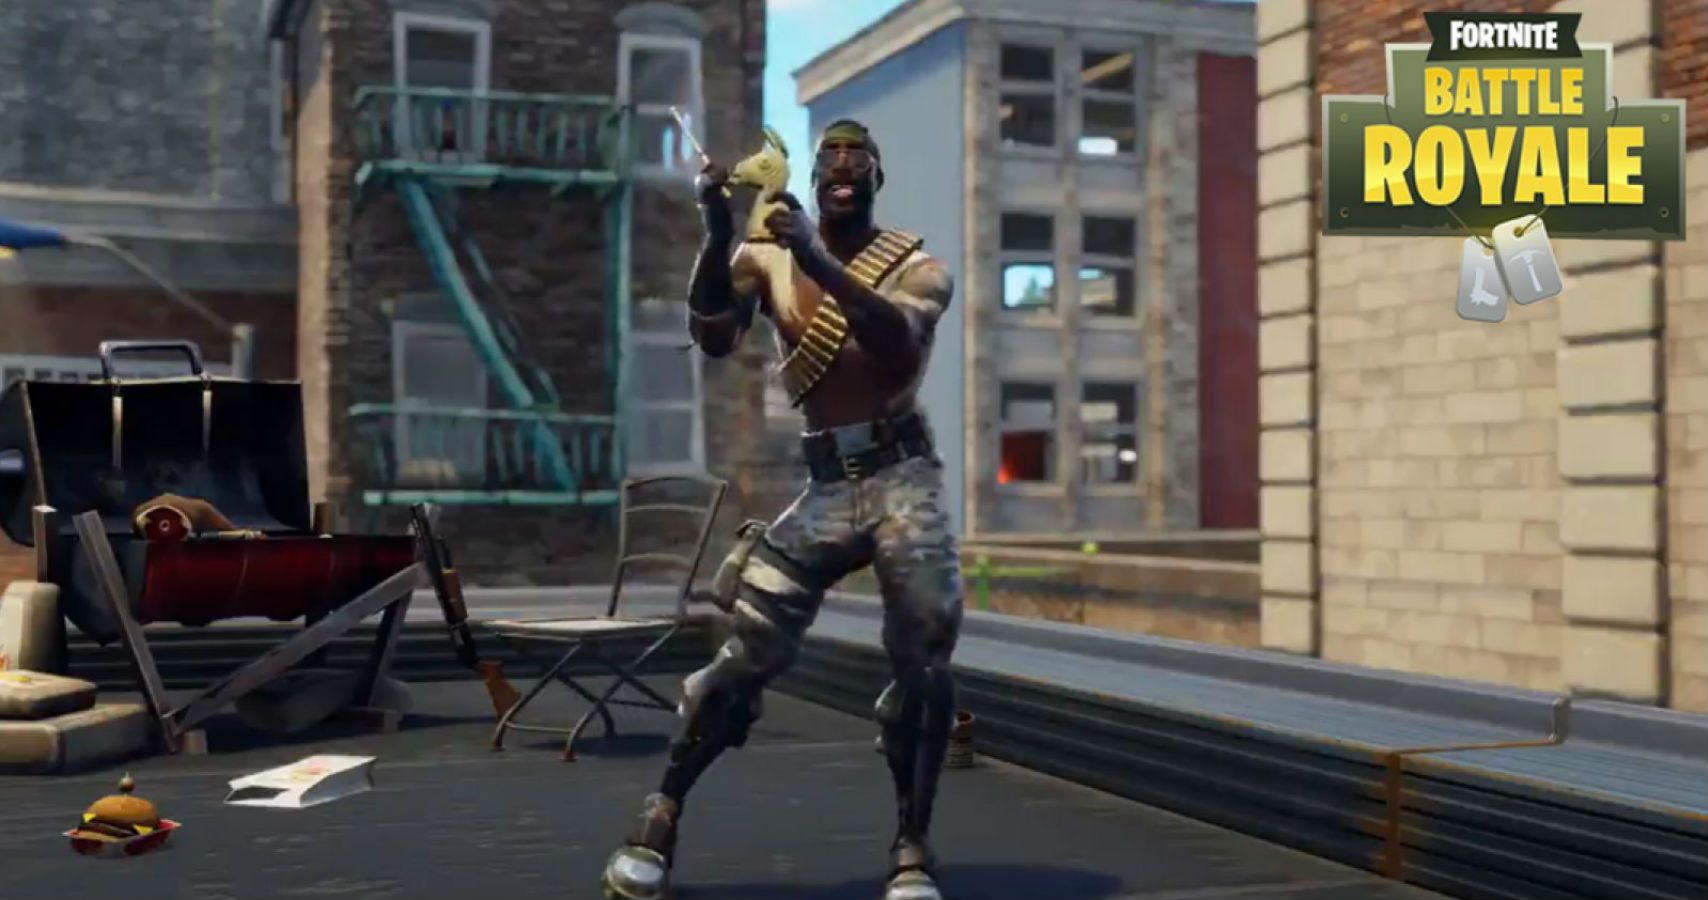 Fortnite S Newest Dance Pays Tribute To Snl S Cowbell Sketch - 